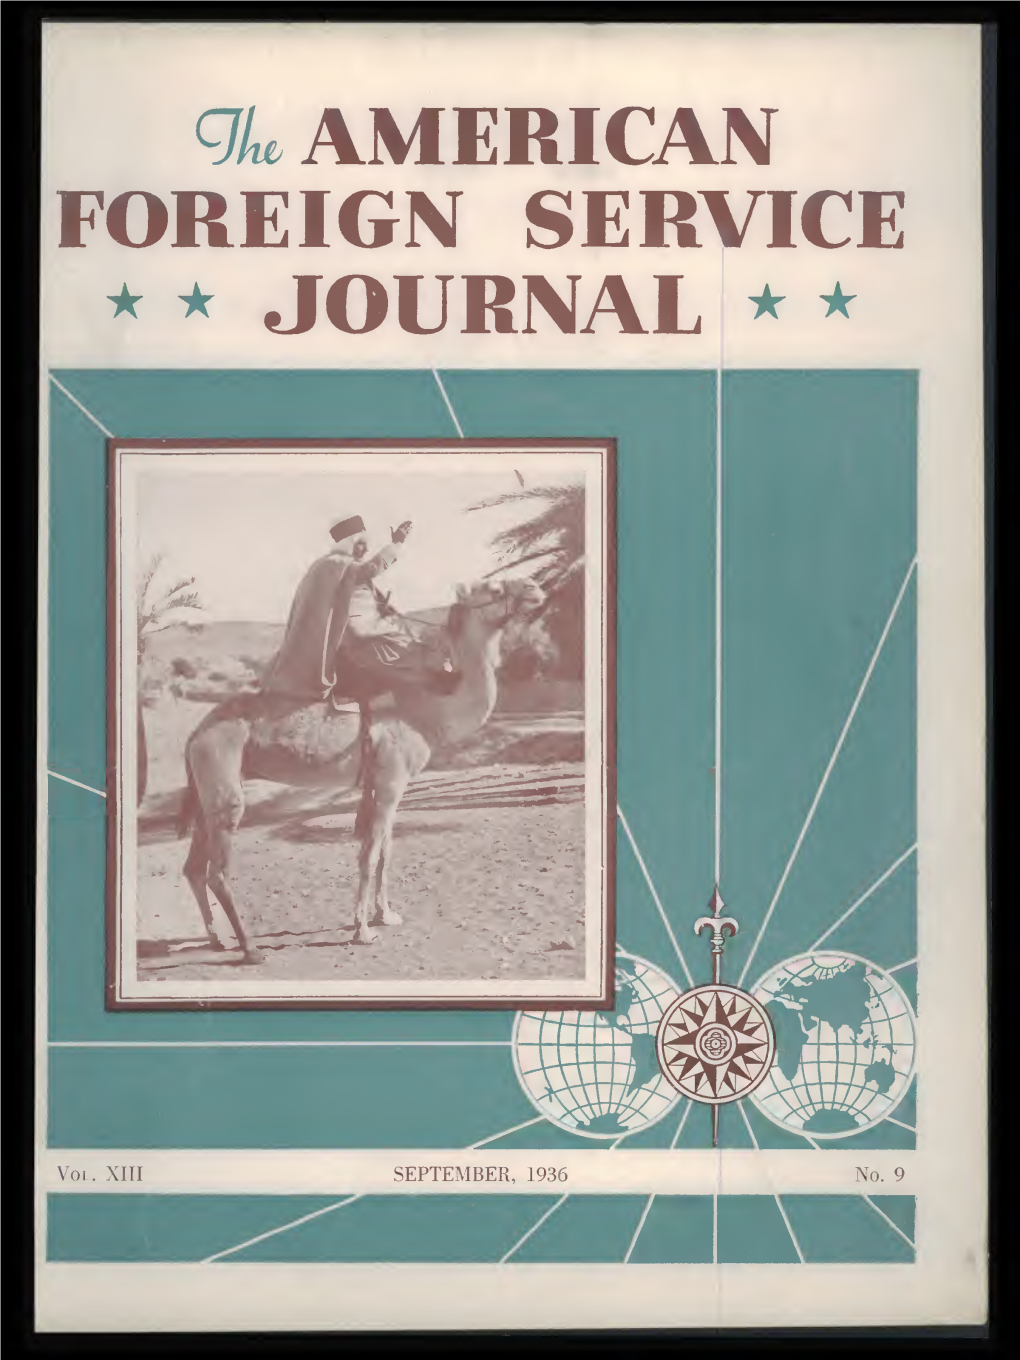 The Foreign Service Journal, September 1936